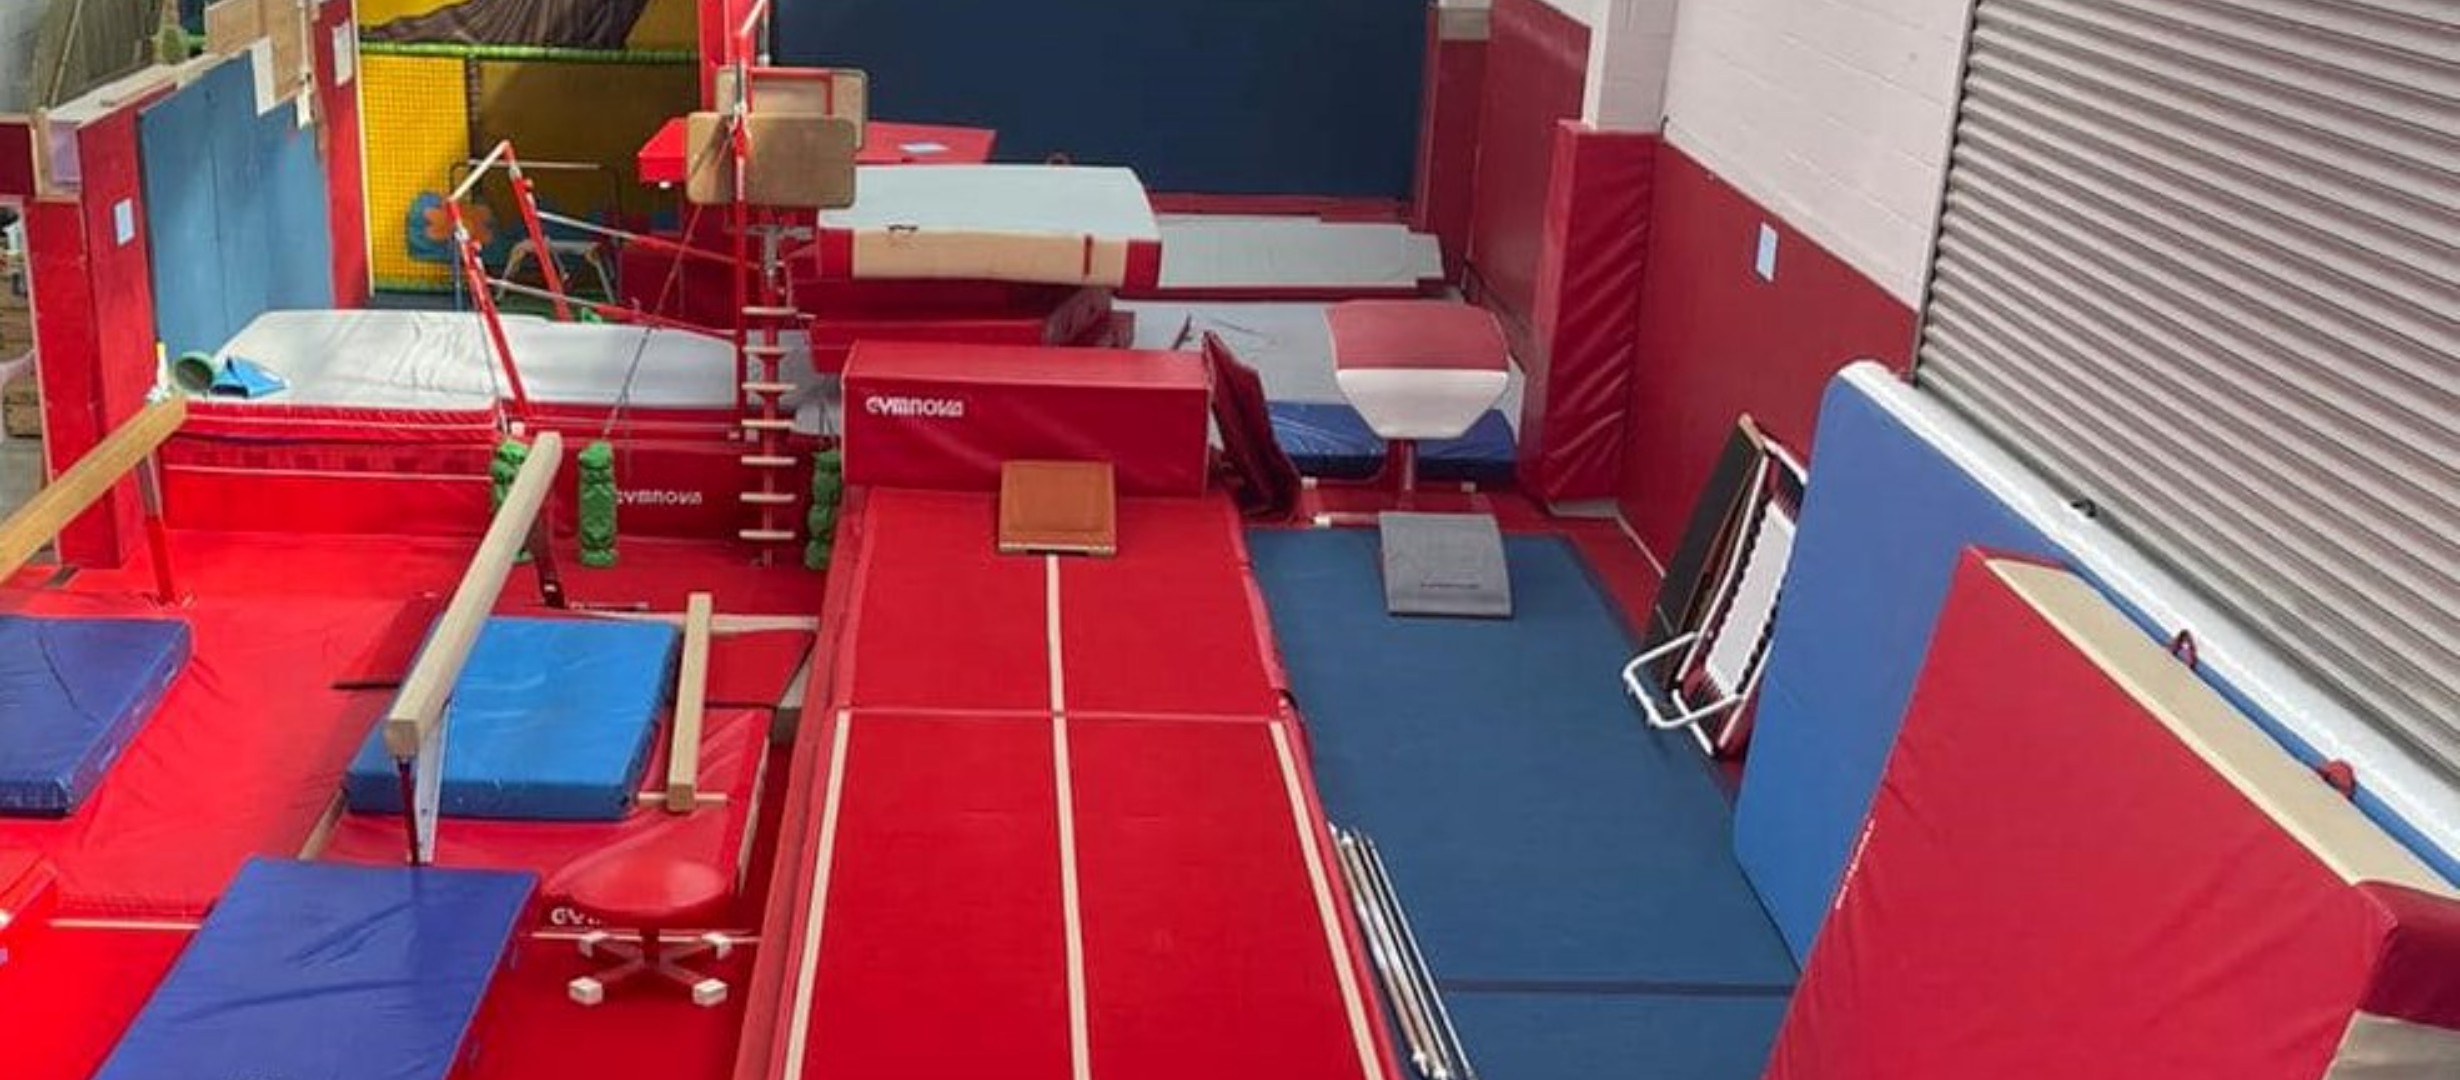 gymnasium with red and blue floor mats, bars, and other equipment